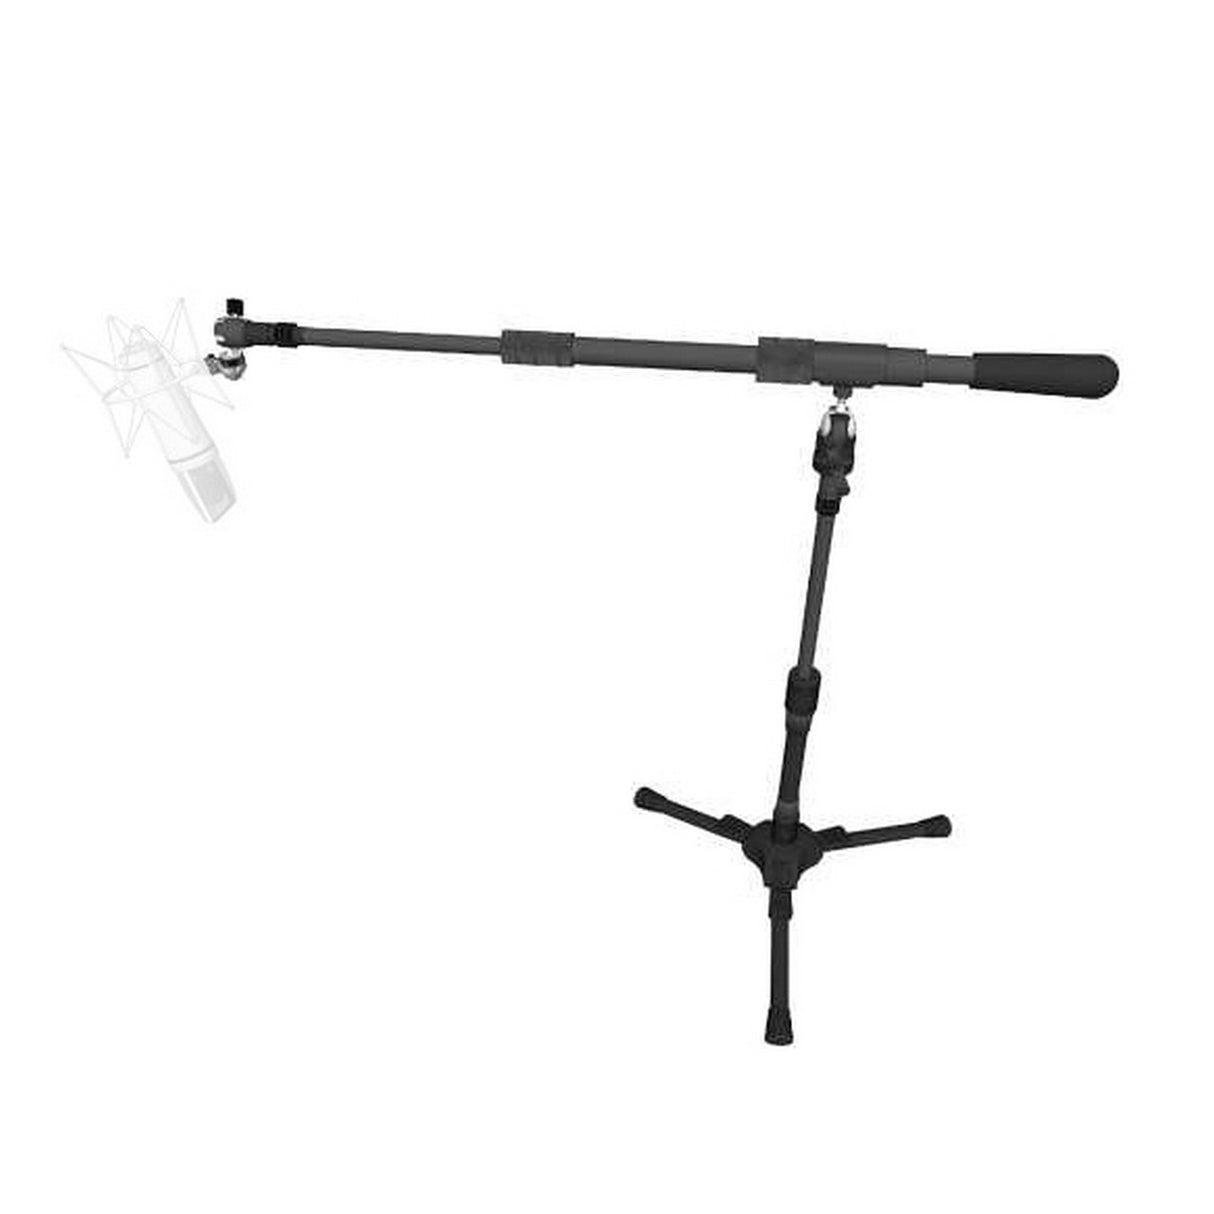 Triad-Orbit T1/OM/M2 | Short Tripod Stand System with T1, OM, and M2